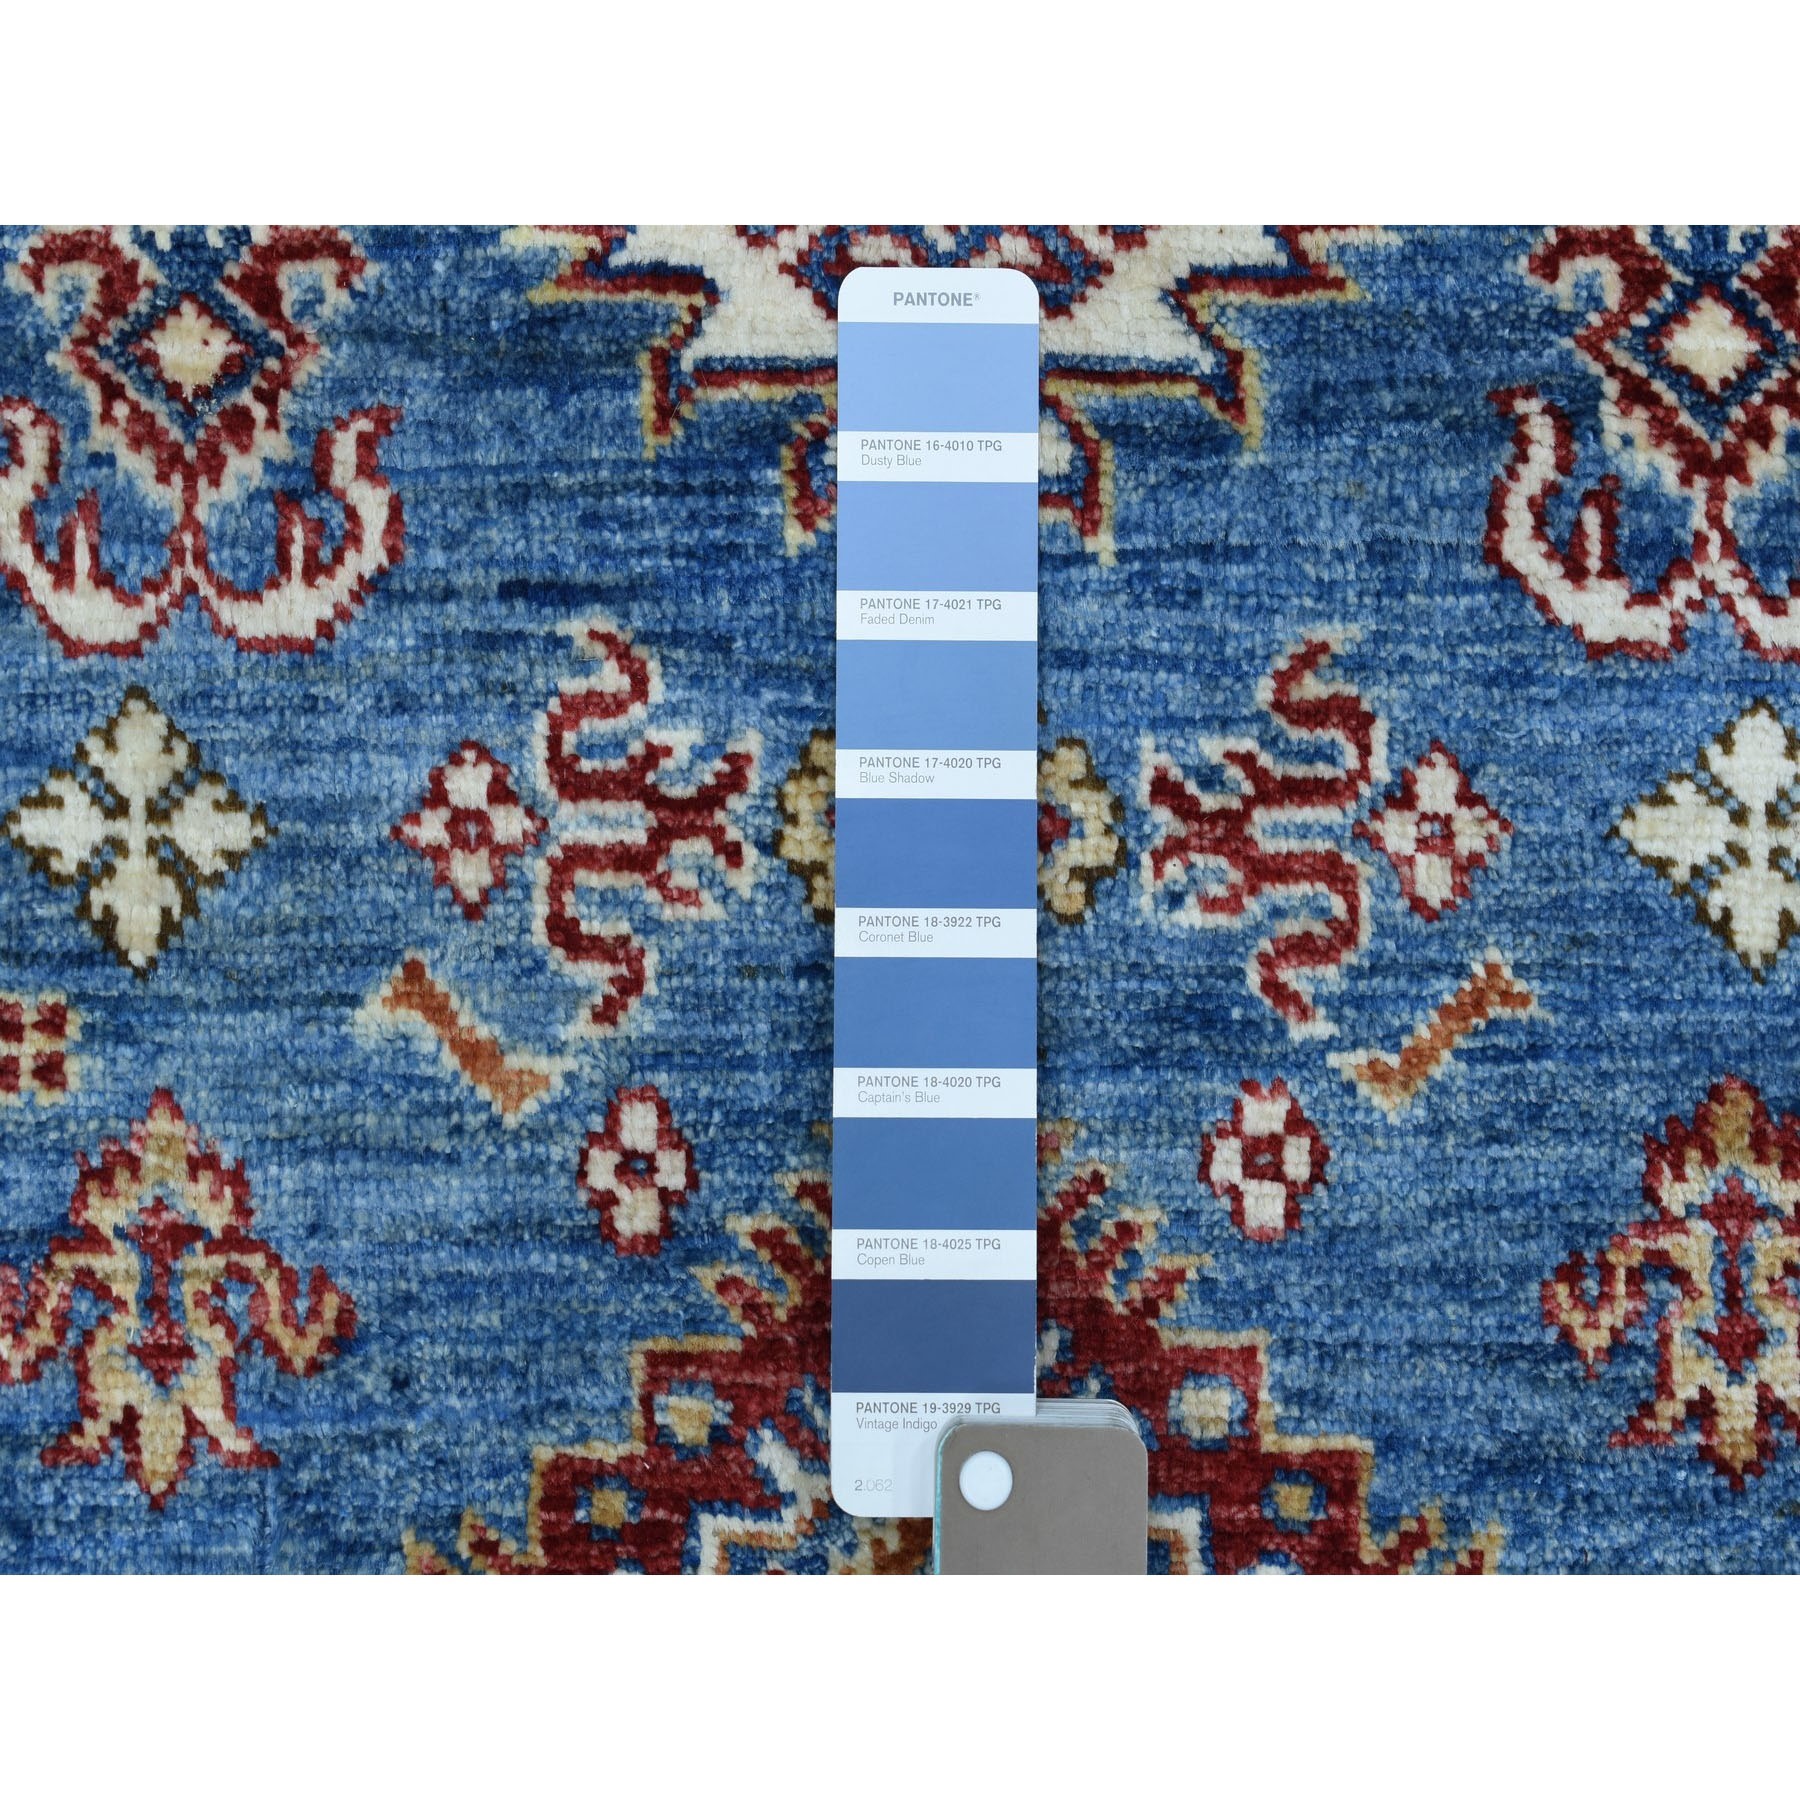 Caucasian Collection Hand Knotted Blue 1136334 Rug